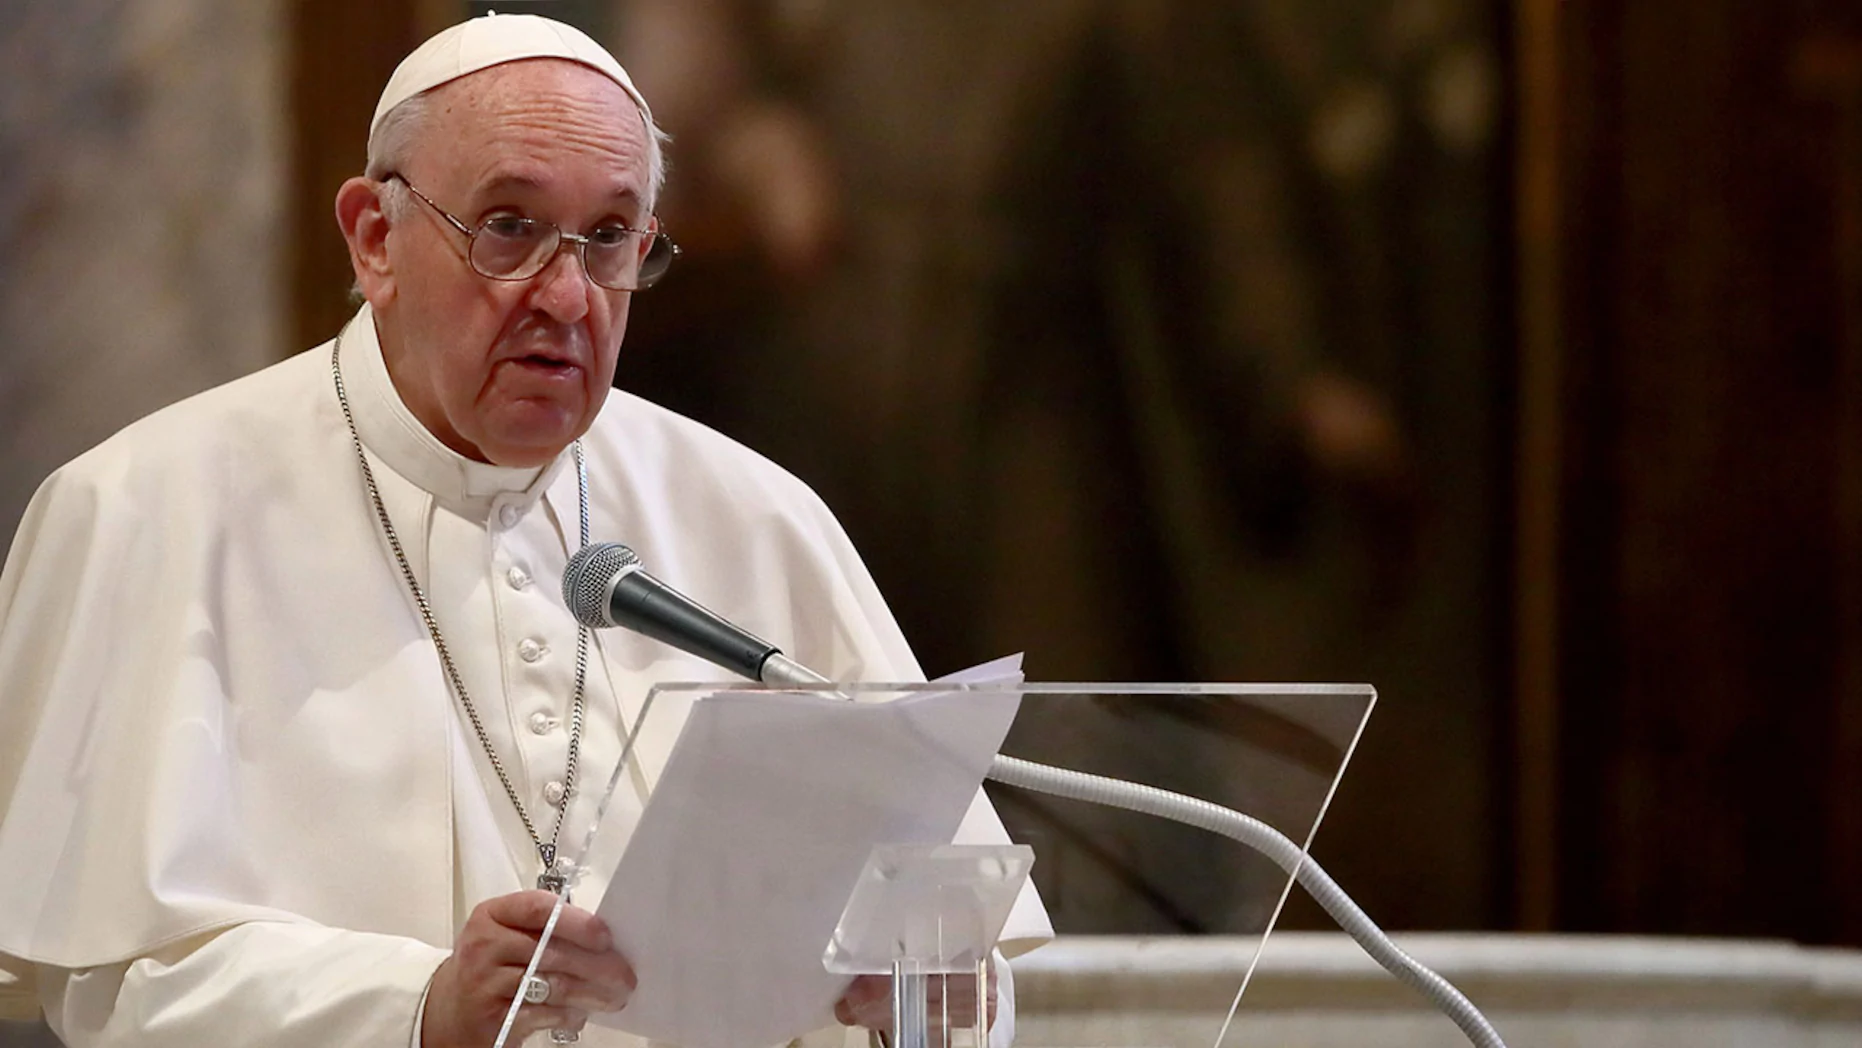 People going 'on holiday' to avoid lockdowns saddening Pope Francis